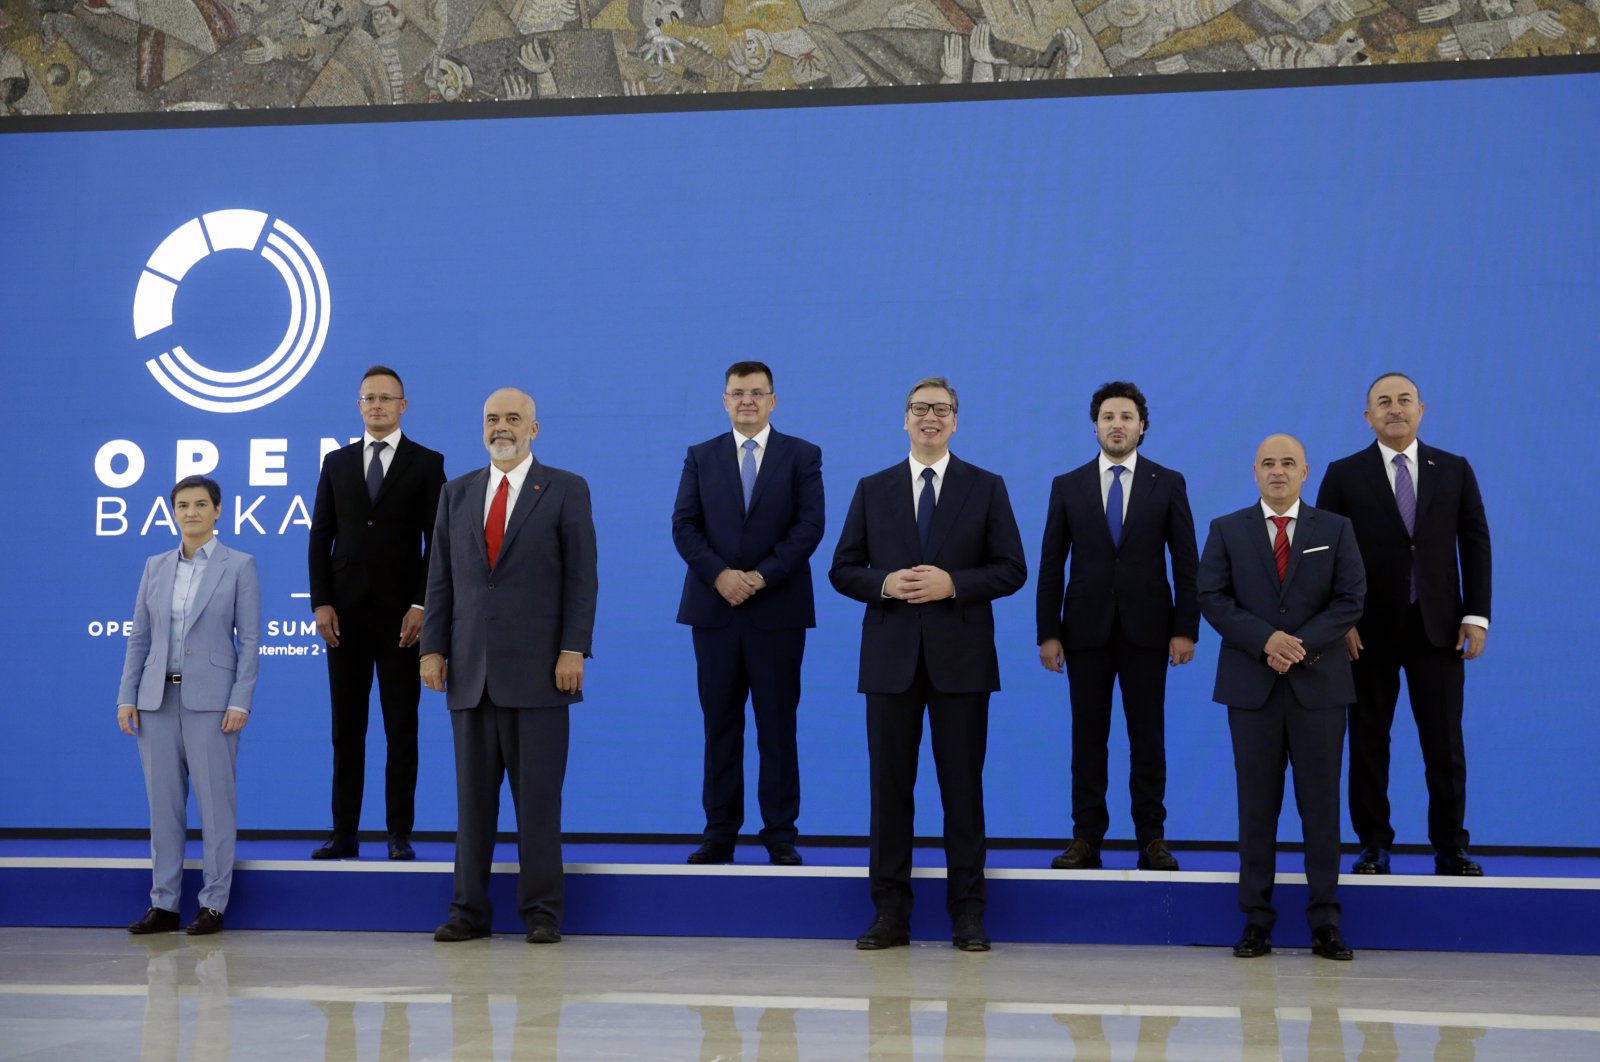 (First row from the left) Serbian Prime Minister Ana Brnabic, Albania&#039;s Prime Minister Edi Rama, Serbian President Aleksandar Vucic and North Macedonia&#039;s Prime Minister Dimitar Kovacevski, (second row from left) Hungary&#039;s Foreign Minister Peter Szijjarto, Chairman of the Council of Ministers of Bosnia and Herzegovina Zoran Tegeltija, Montenegro&#039;s Prime Minister Dritan Abazovic and Turkish Foreign Minister Mevlüt Çavuşoğlu pose for a family photo before the during the Open Balkan economic summit for regional cooperation in Belgrade, Serbia, Sept. 2, 2022.  (EPA Photo)